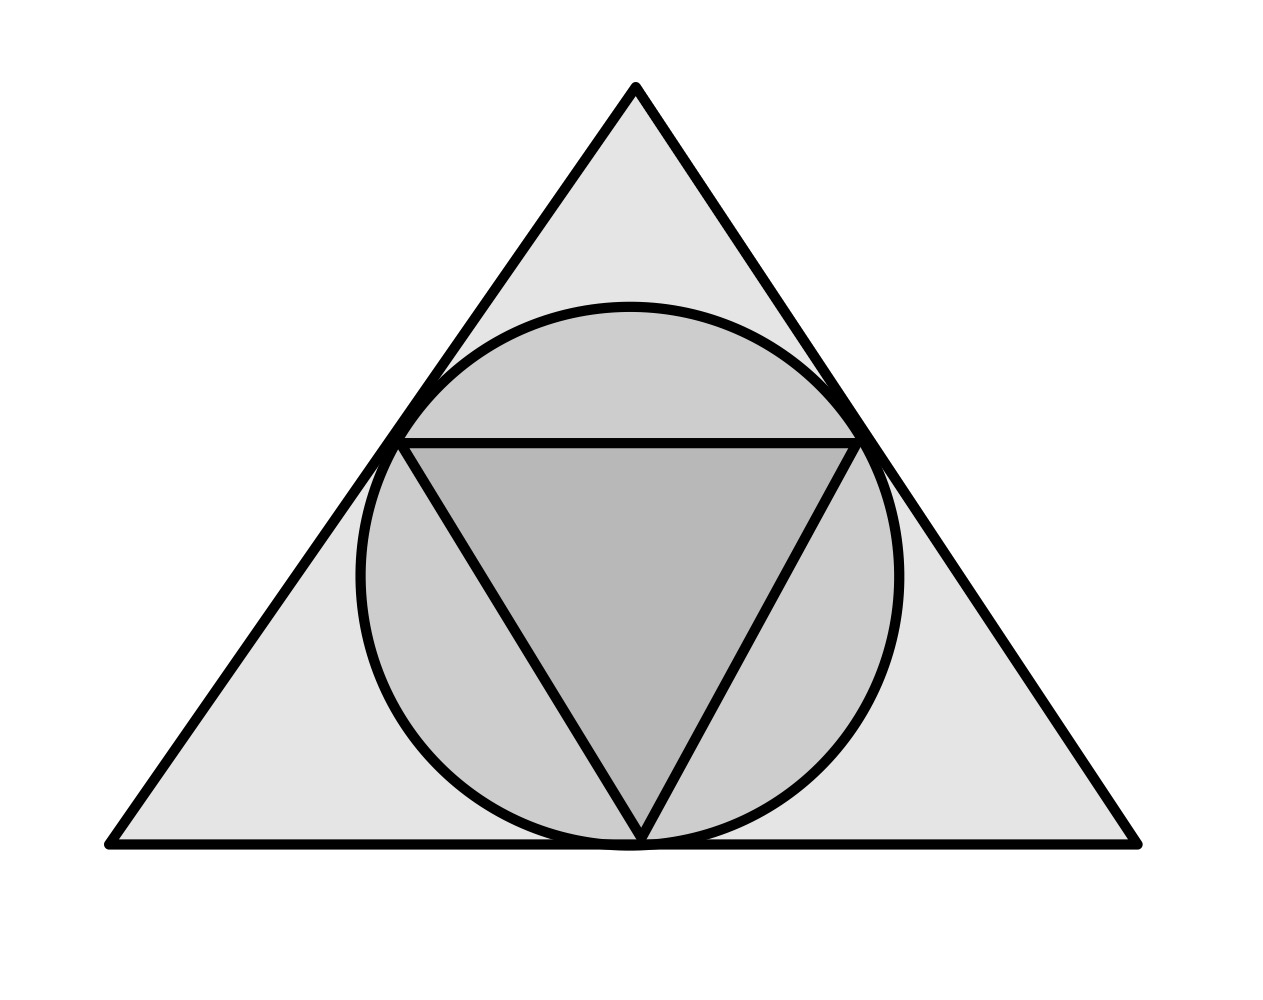 Quartered equilateral triangle